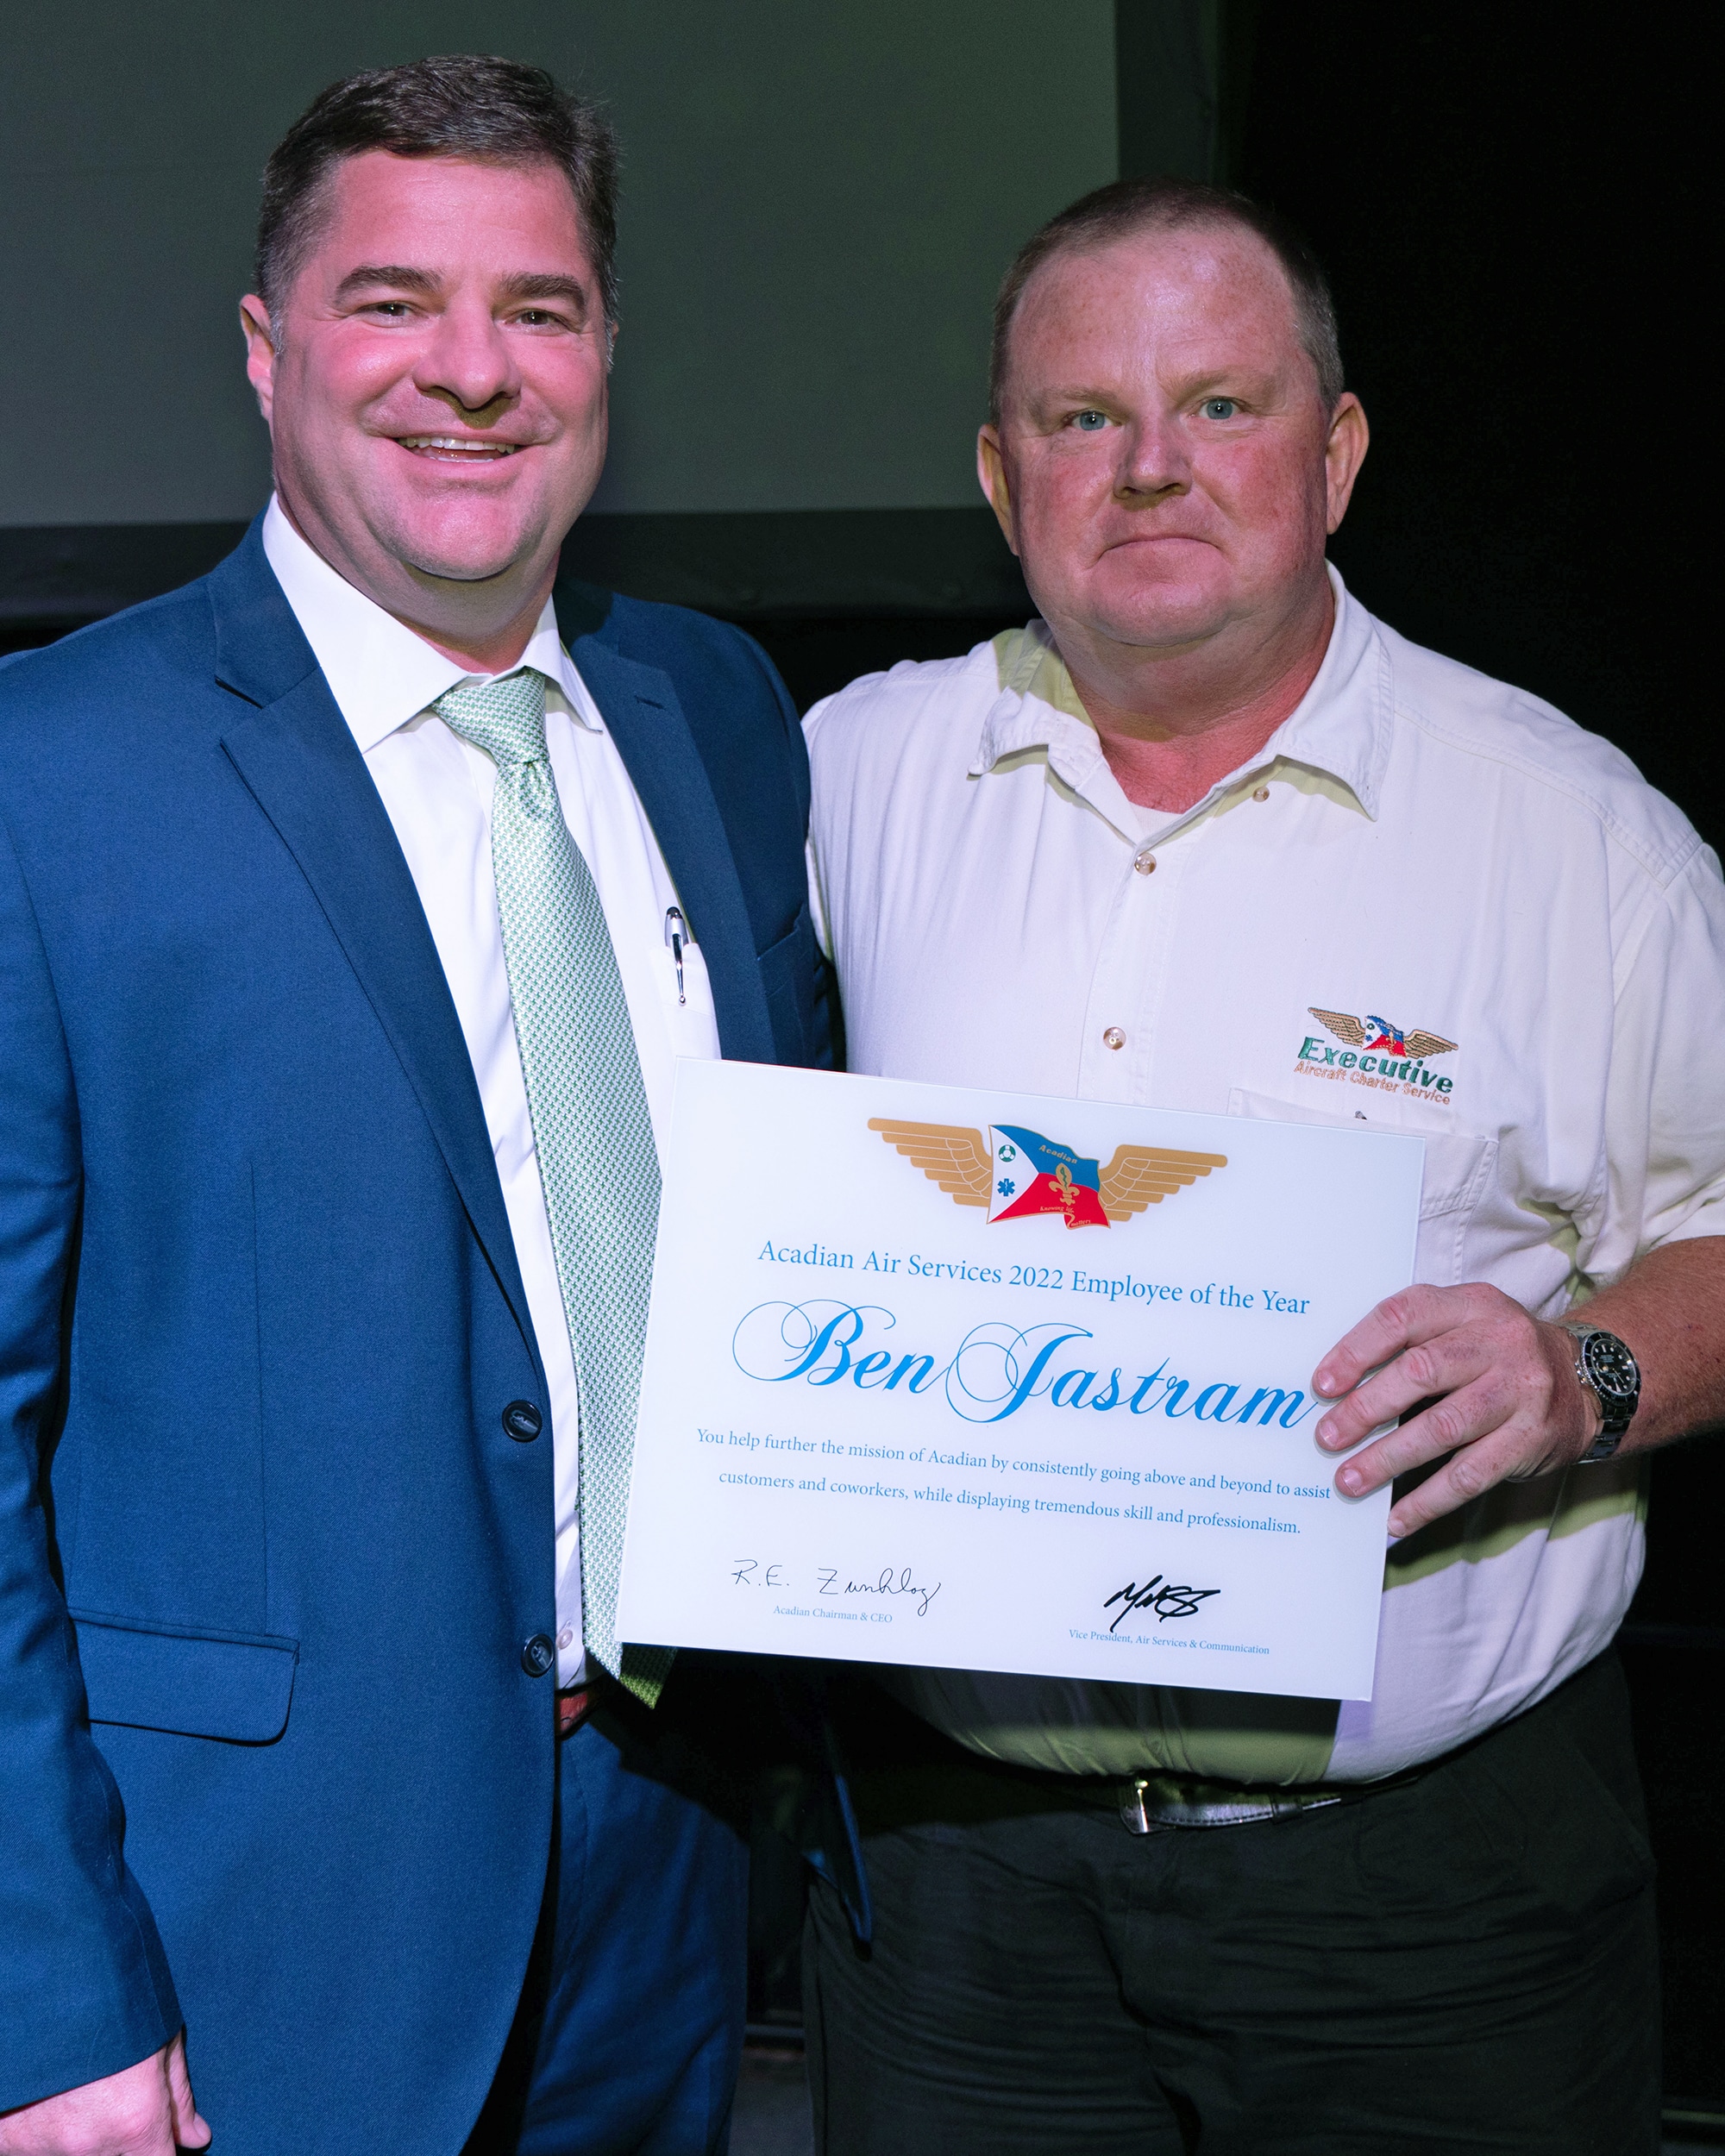 Ben Jastram Named as Air Services 2022 Employee of the Year